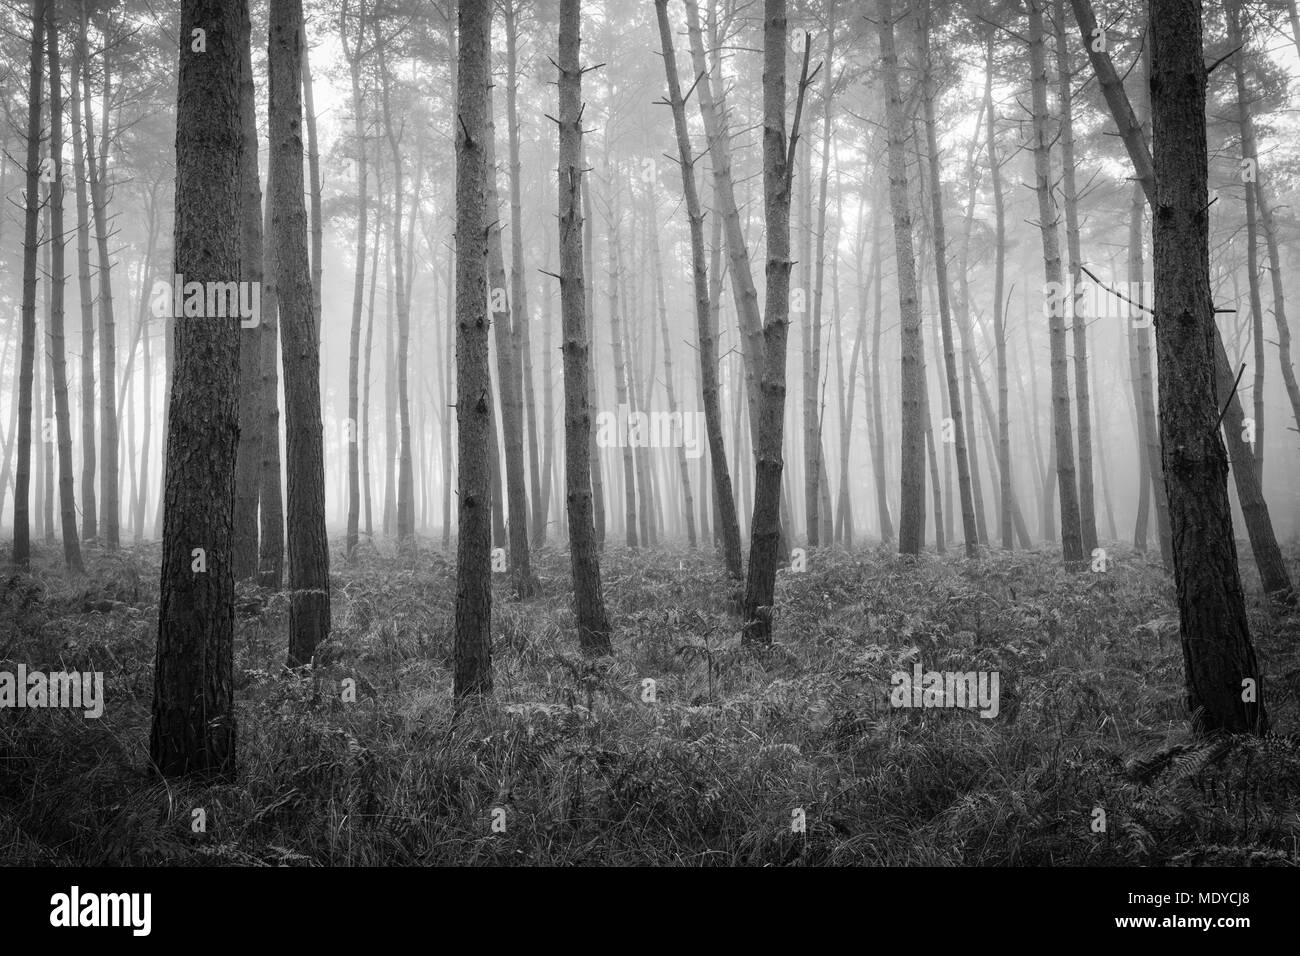 Black and white image of tree trunks in a pine forest on misty morning in Hesse, Germany Stock Photo